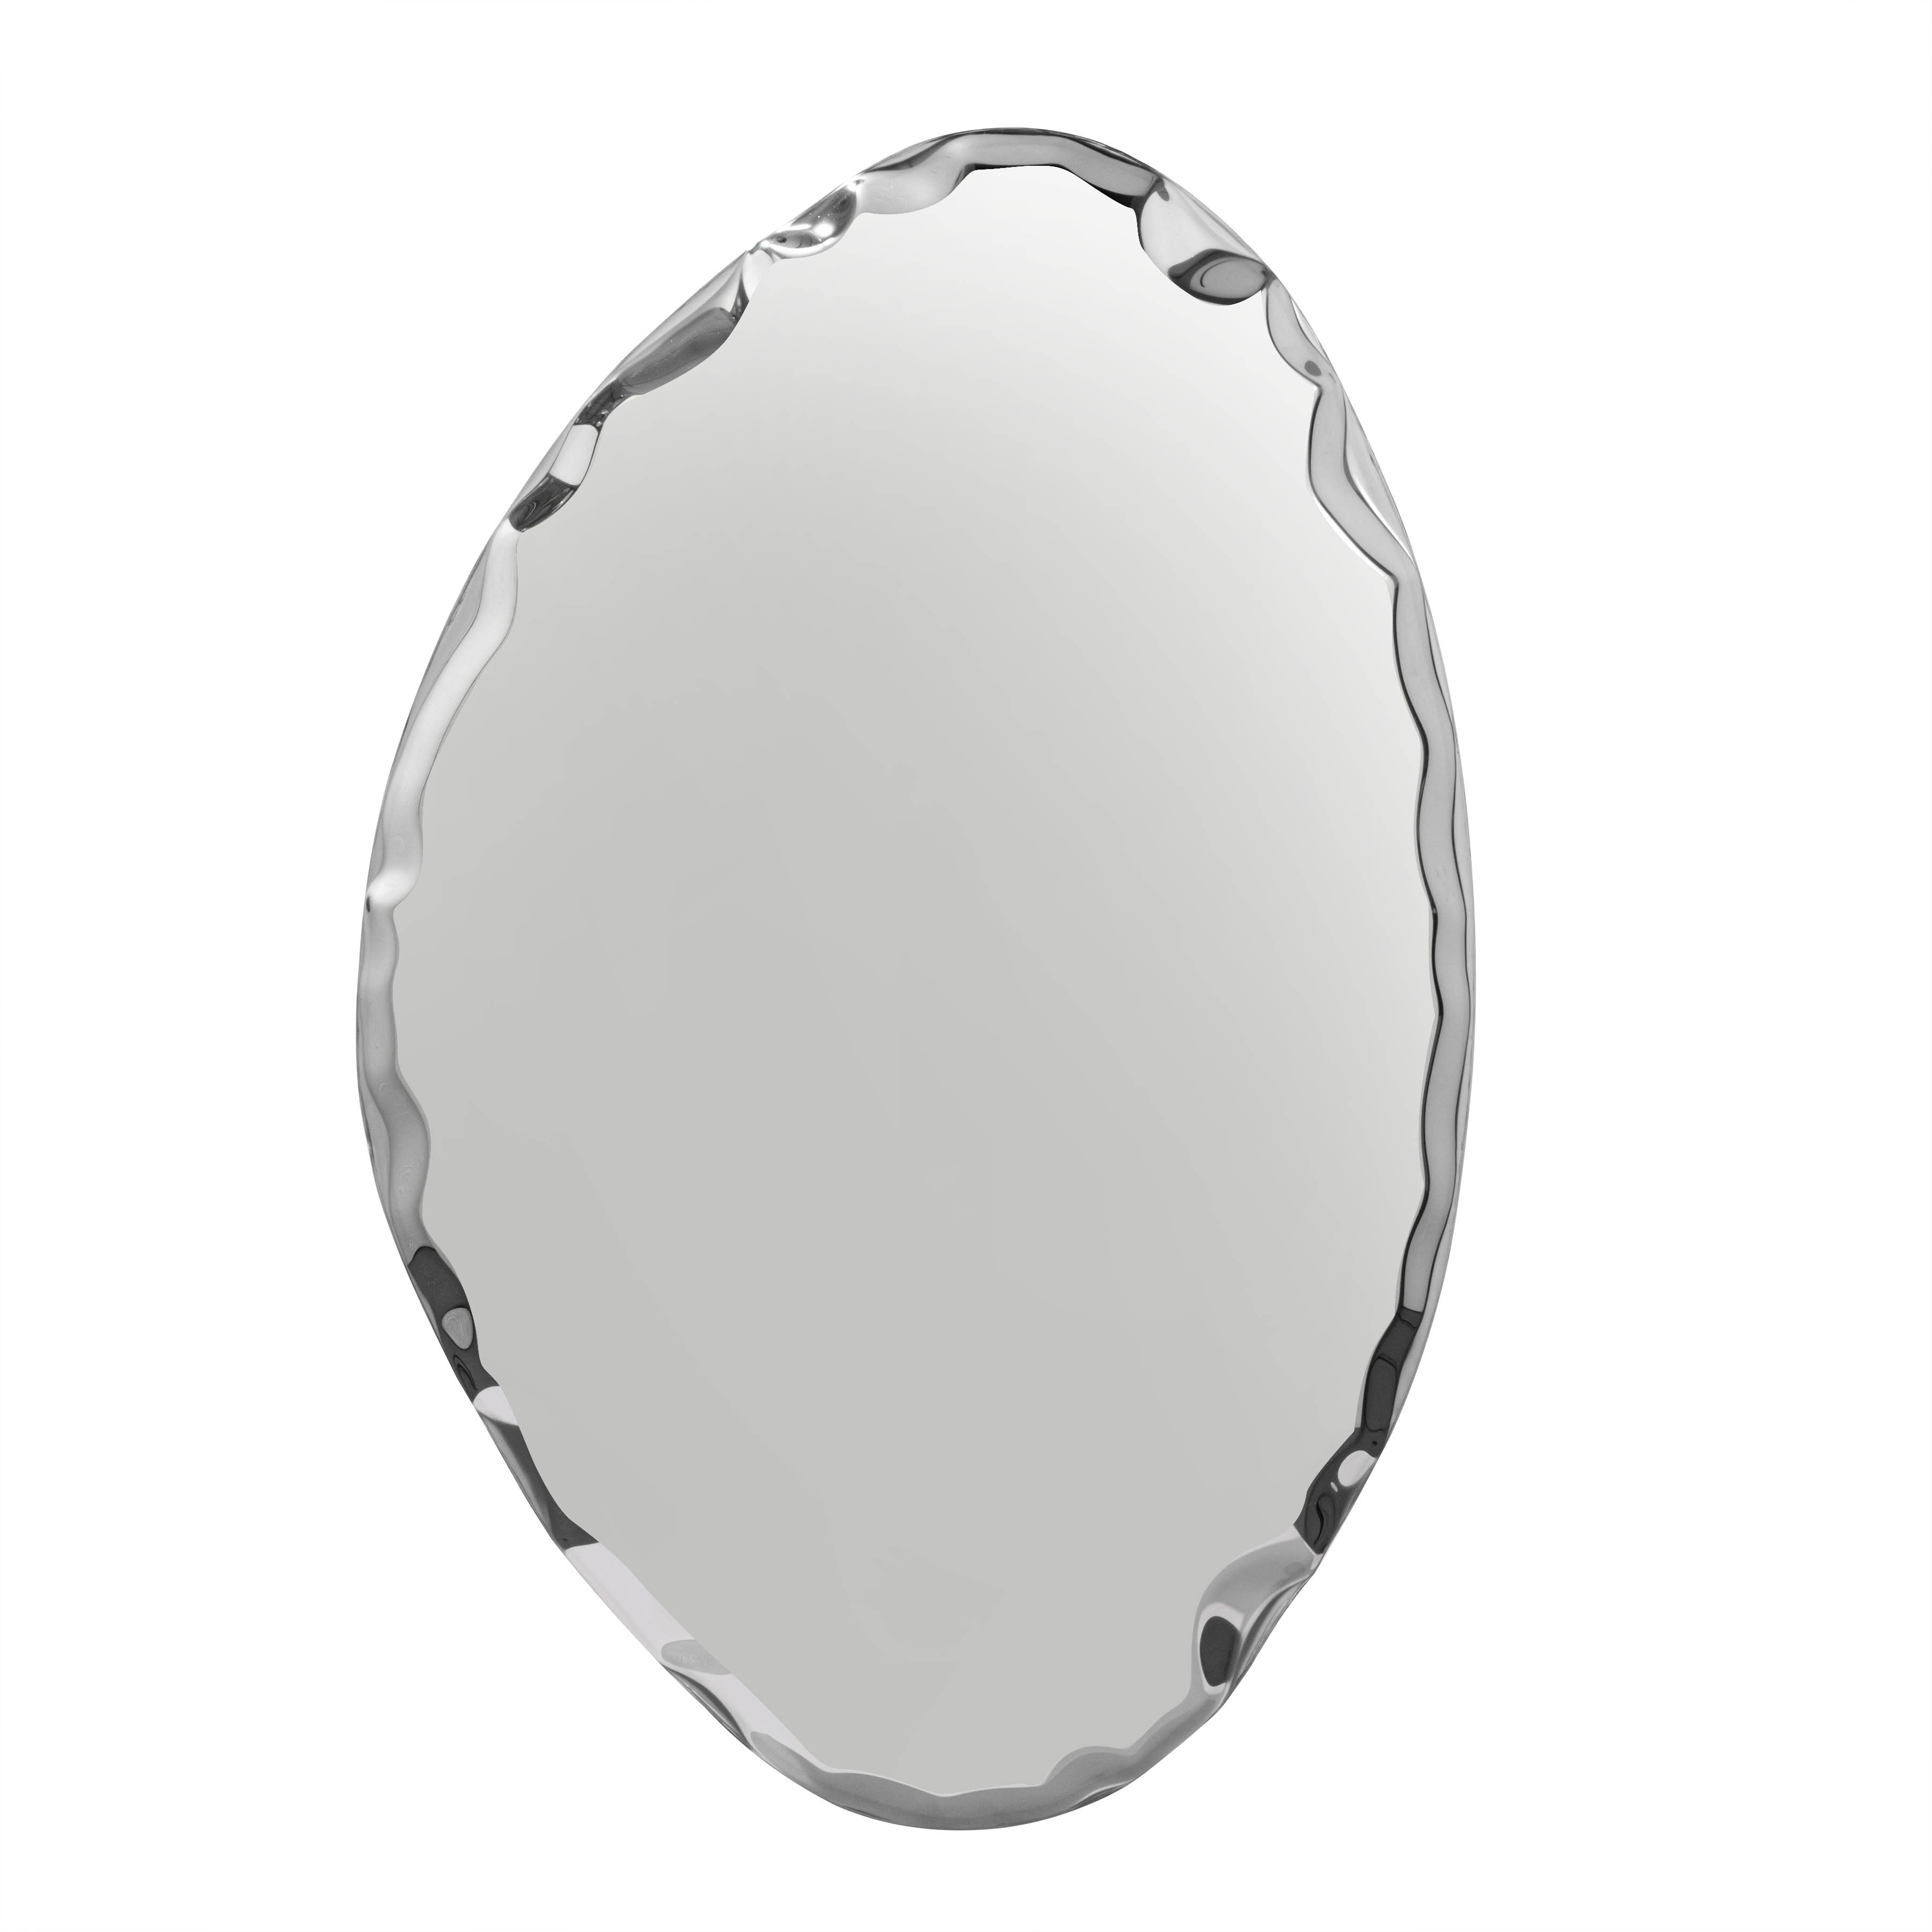 Tafla Abstract Wall Mounted Polished Stainless Steel Elliptic Drop Mirror / Small